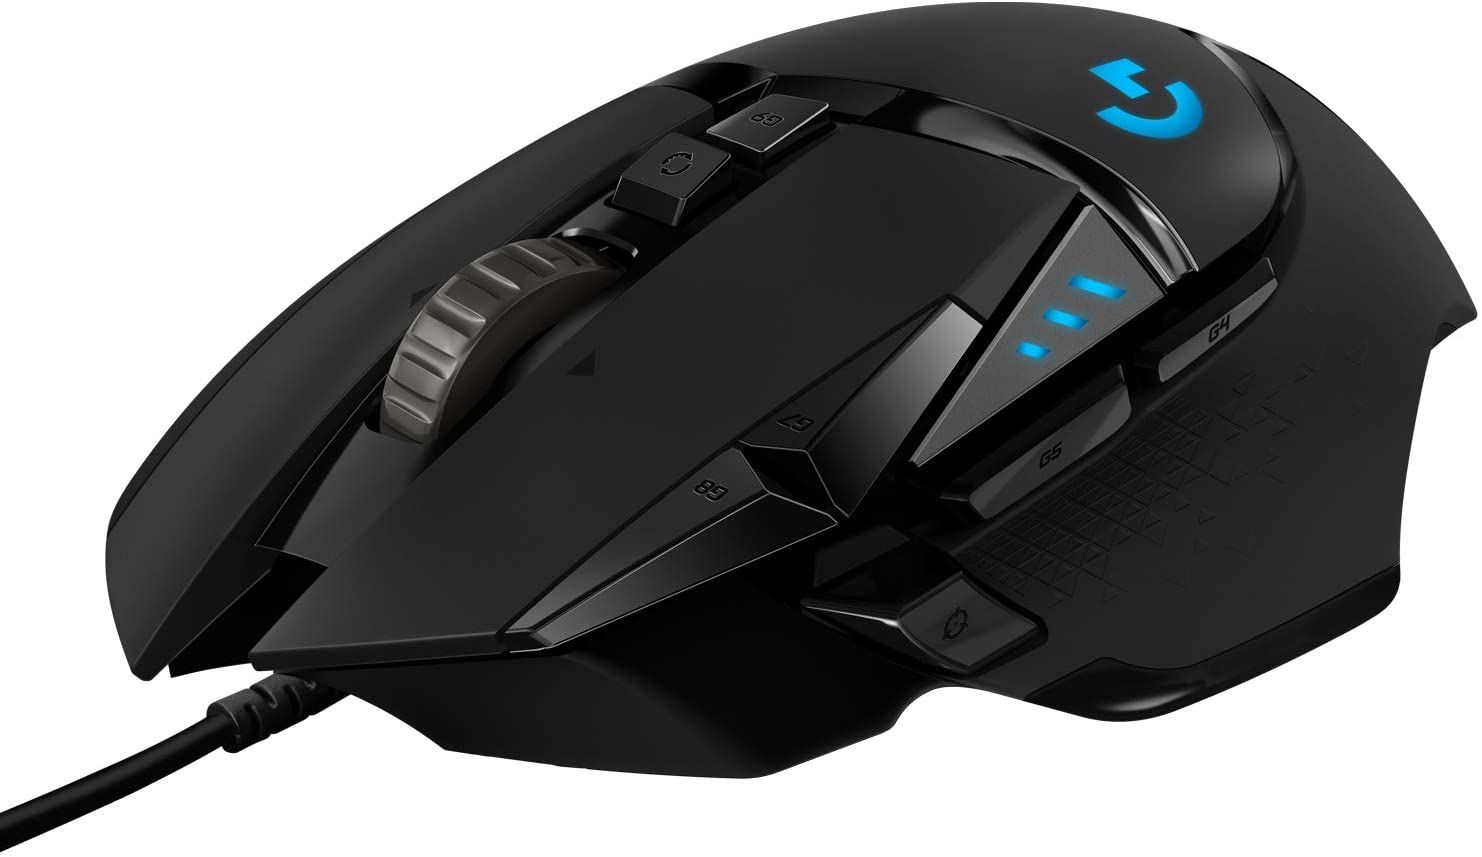 The complete view of Logitech G502 HERO